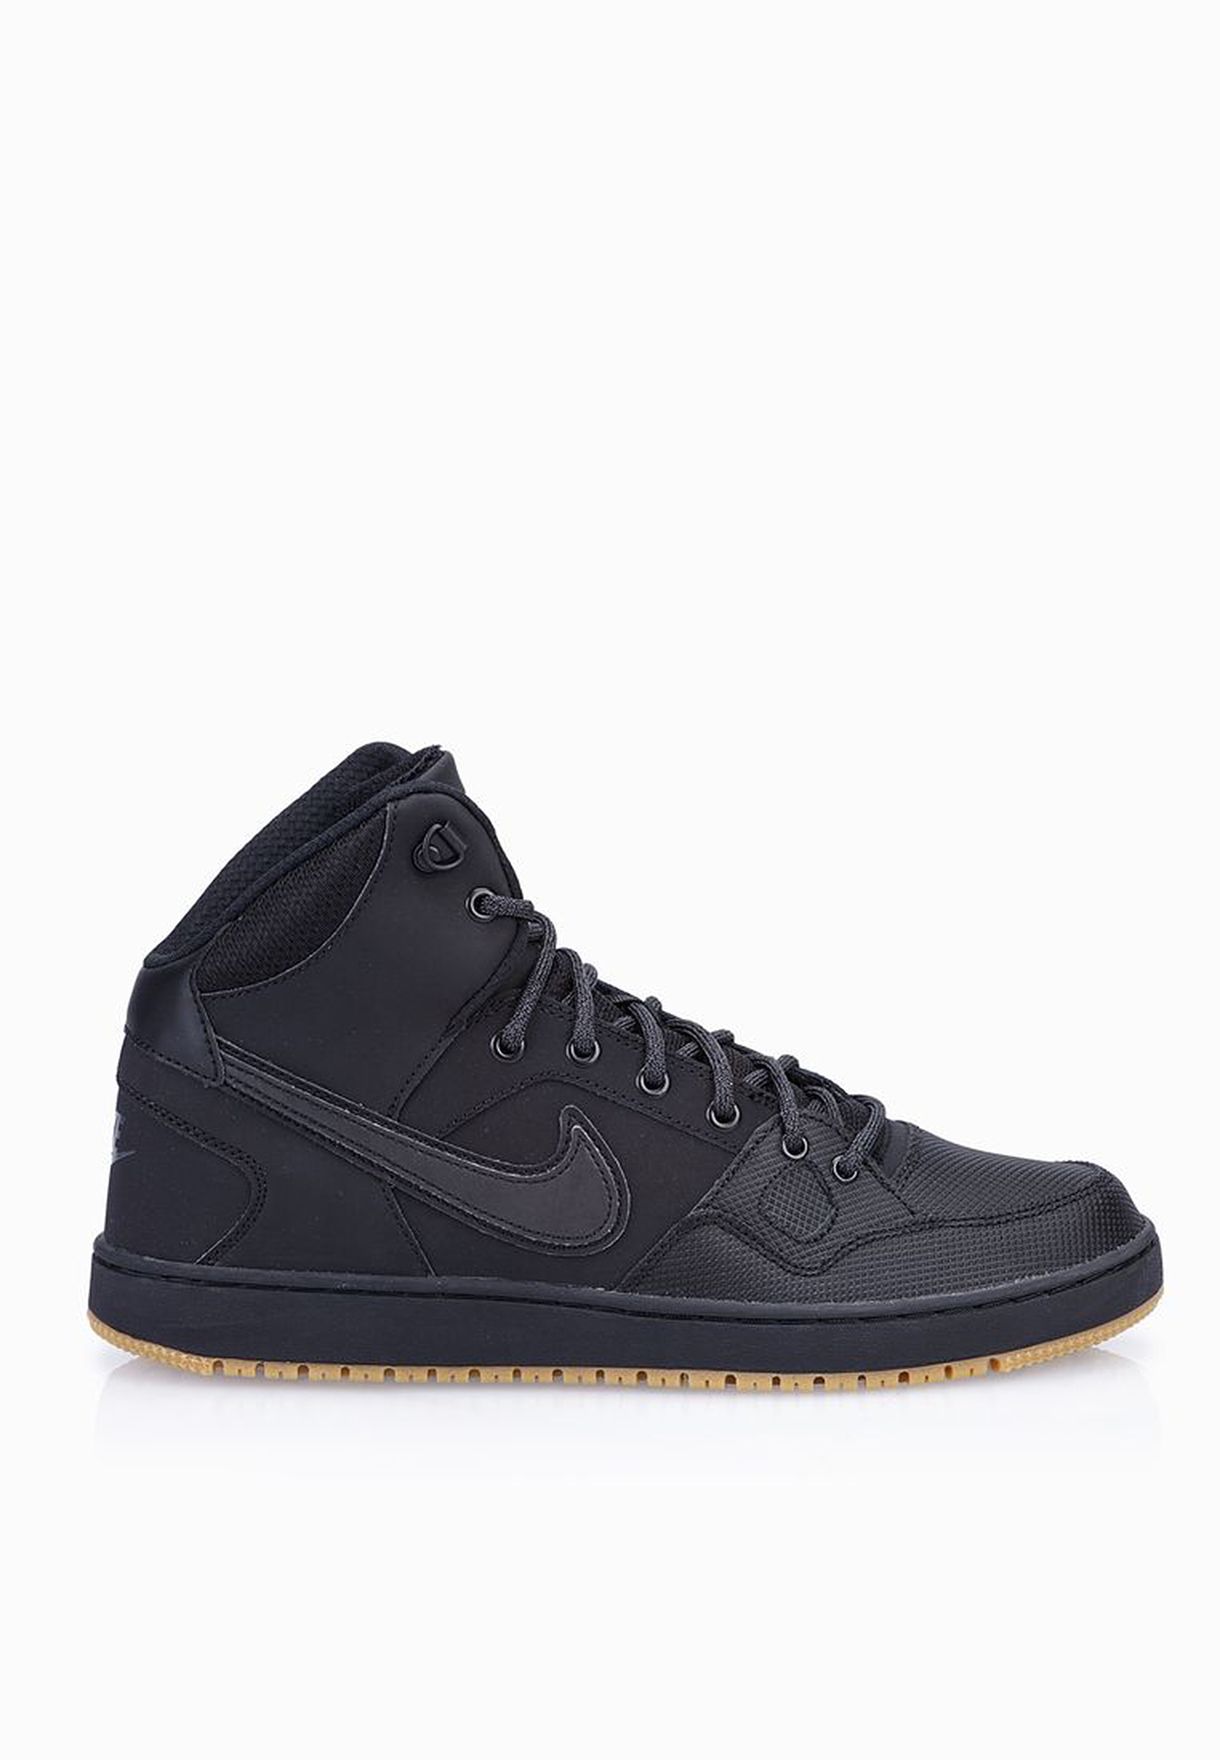 son of force mid winter black